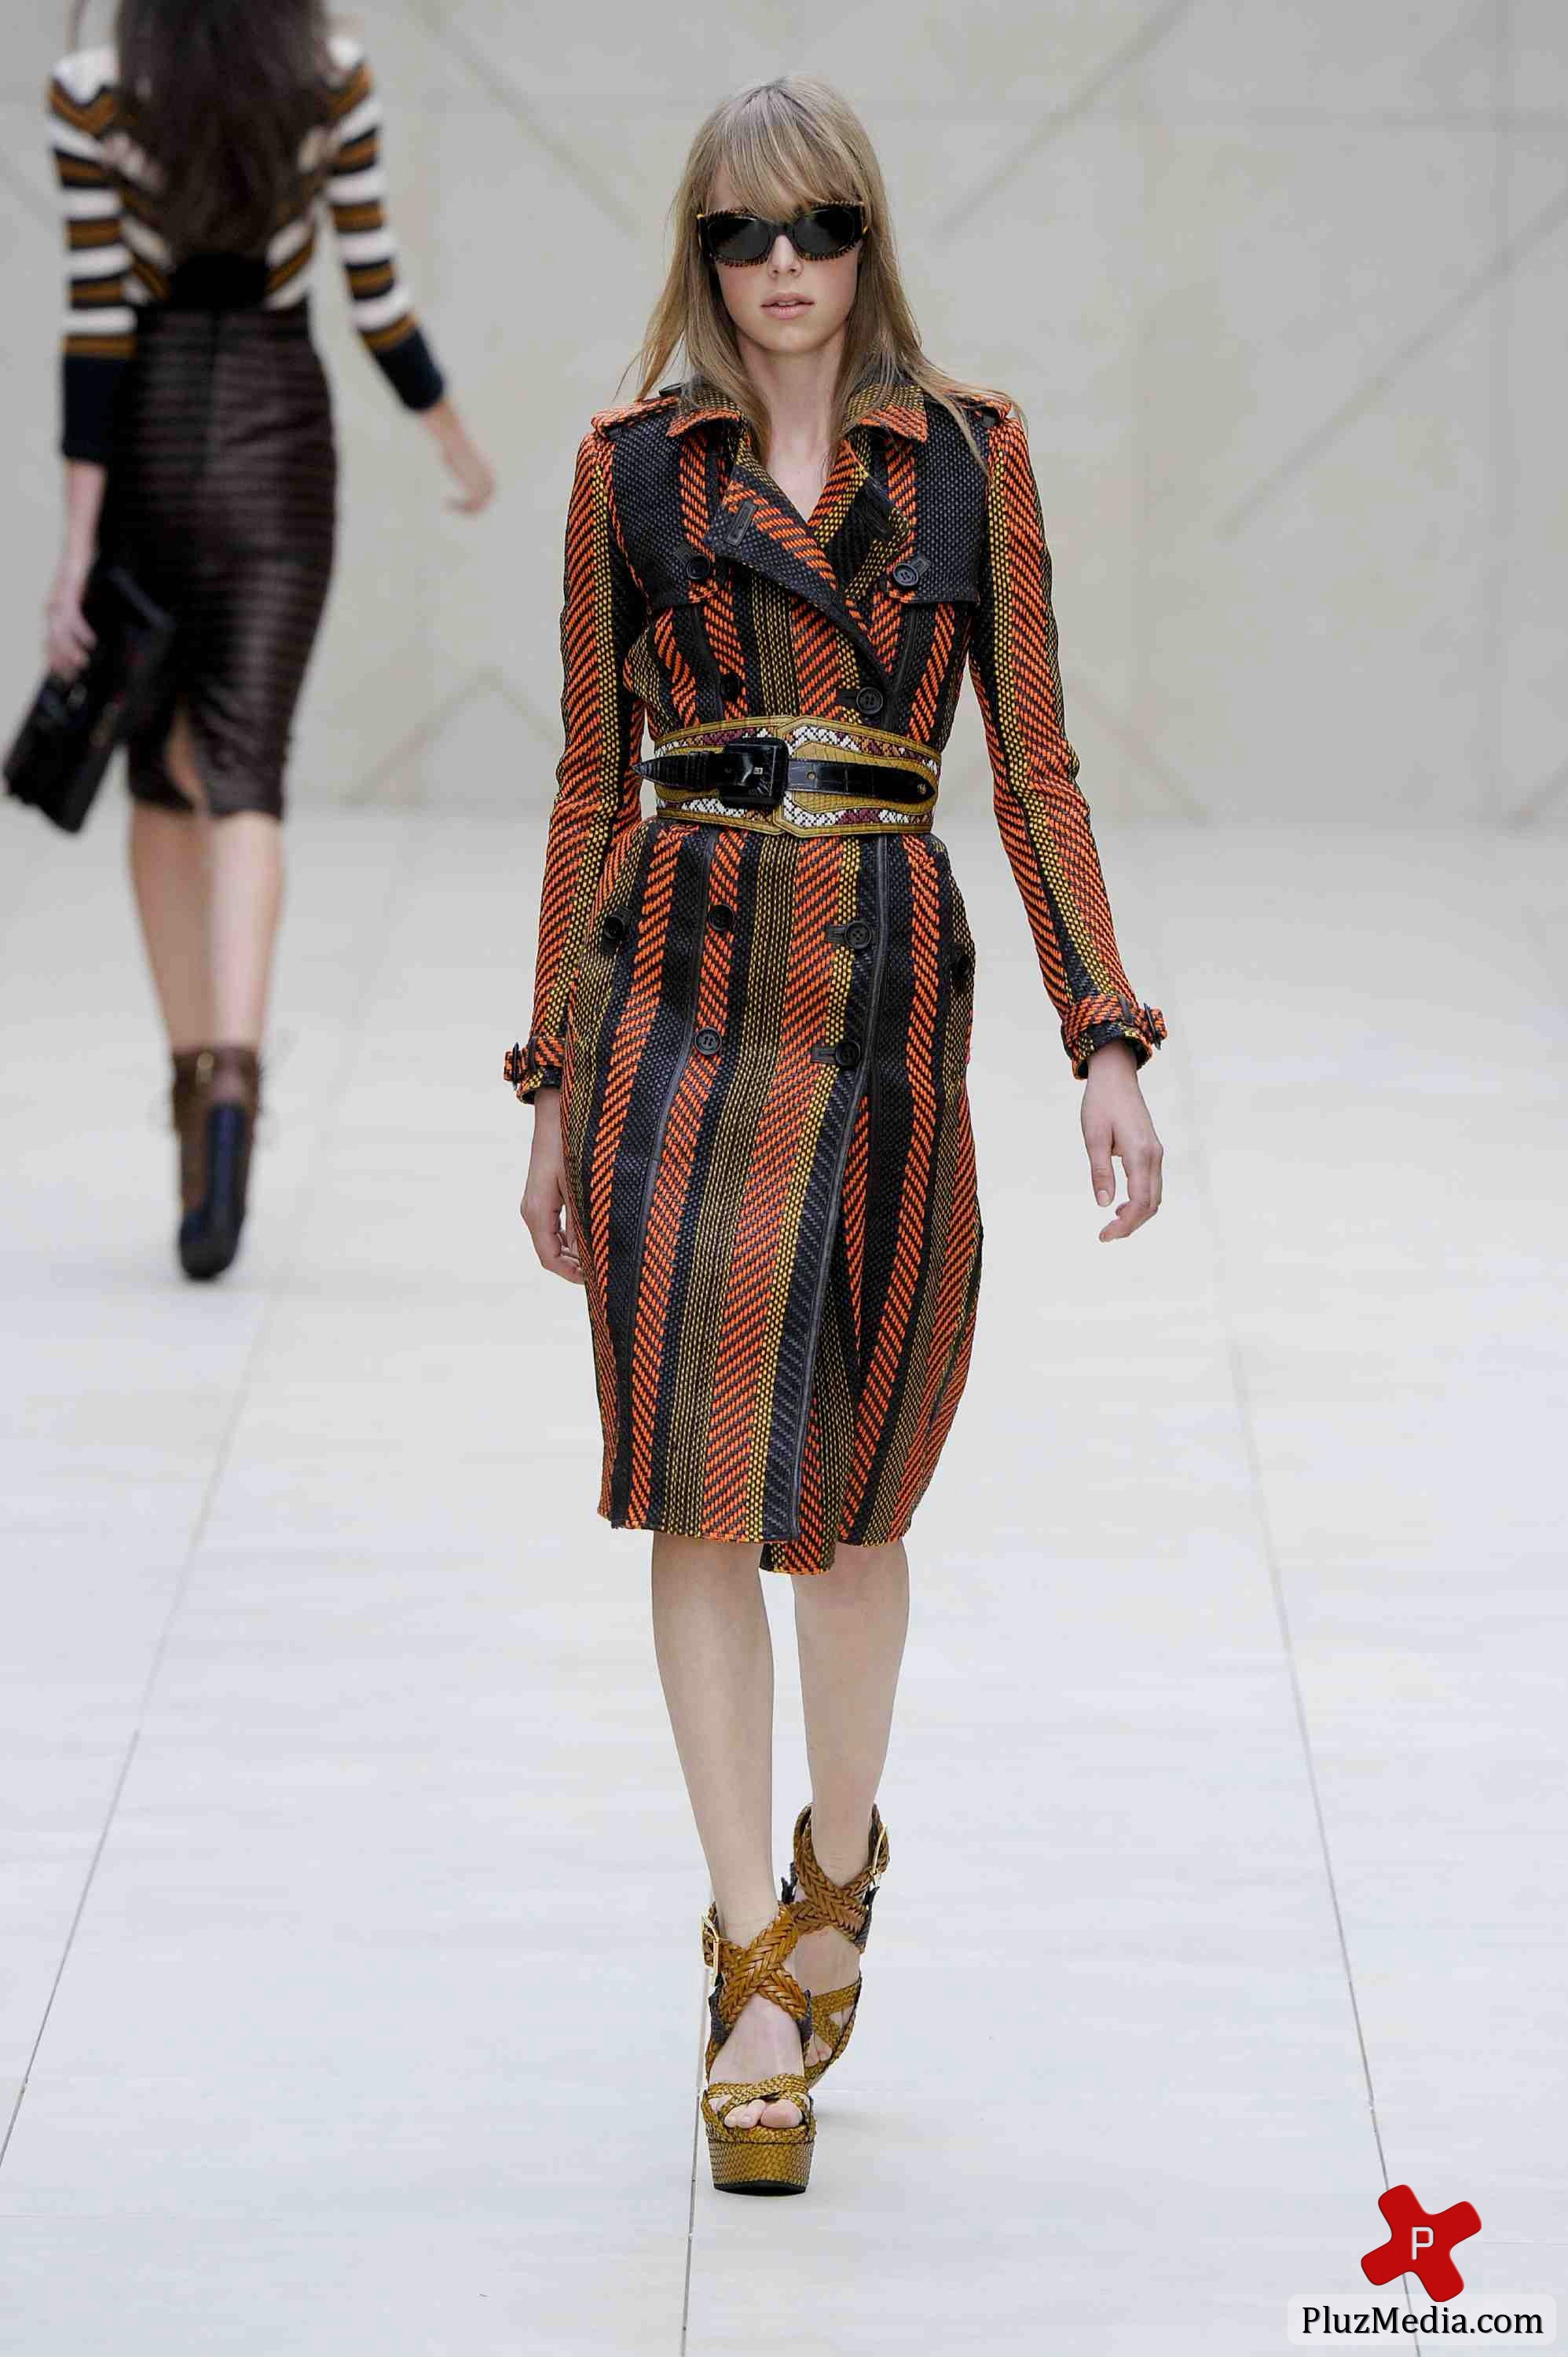 Edie Campbell - Cara Delevingne 1,London Fashion Week Spring Summer 2012 - Burberry Prorsum - Catwalk | Picture 82554